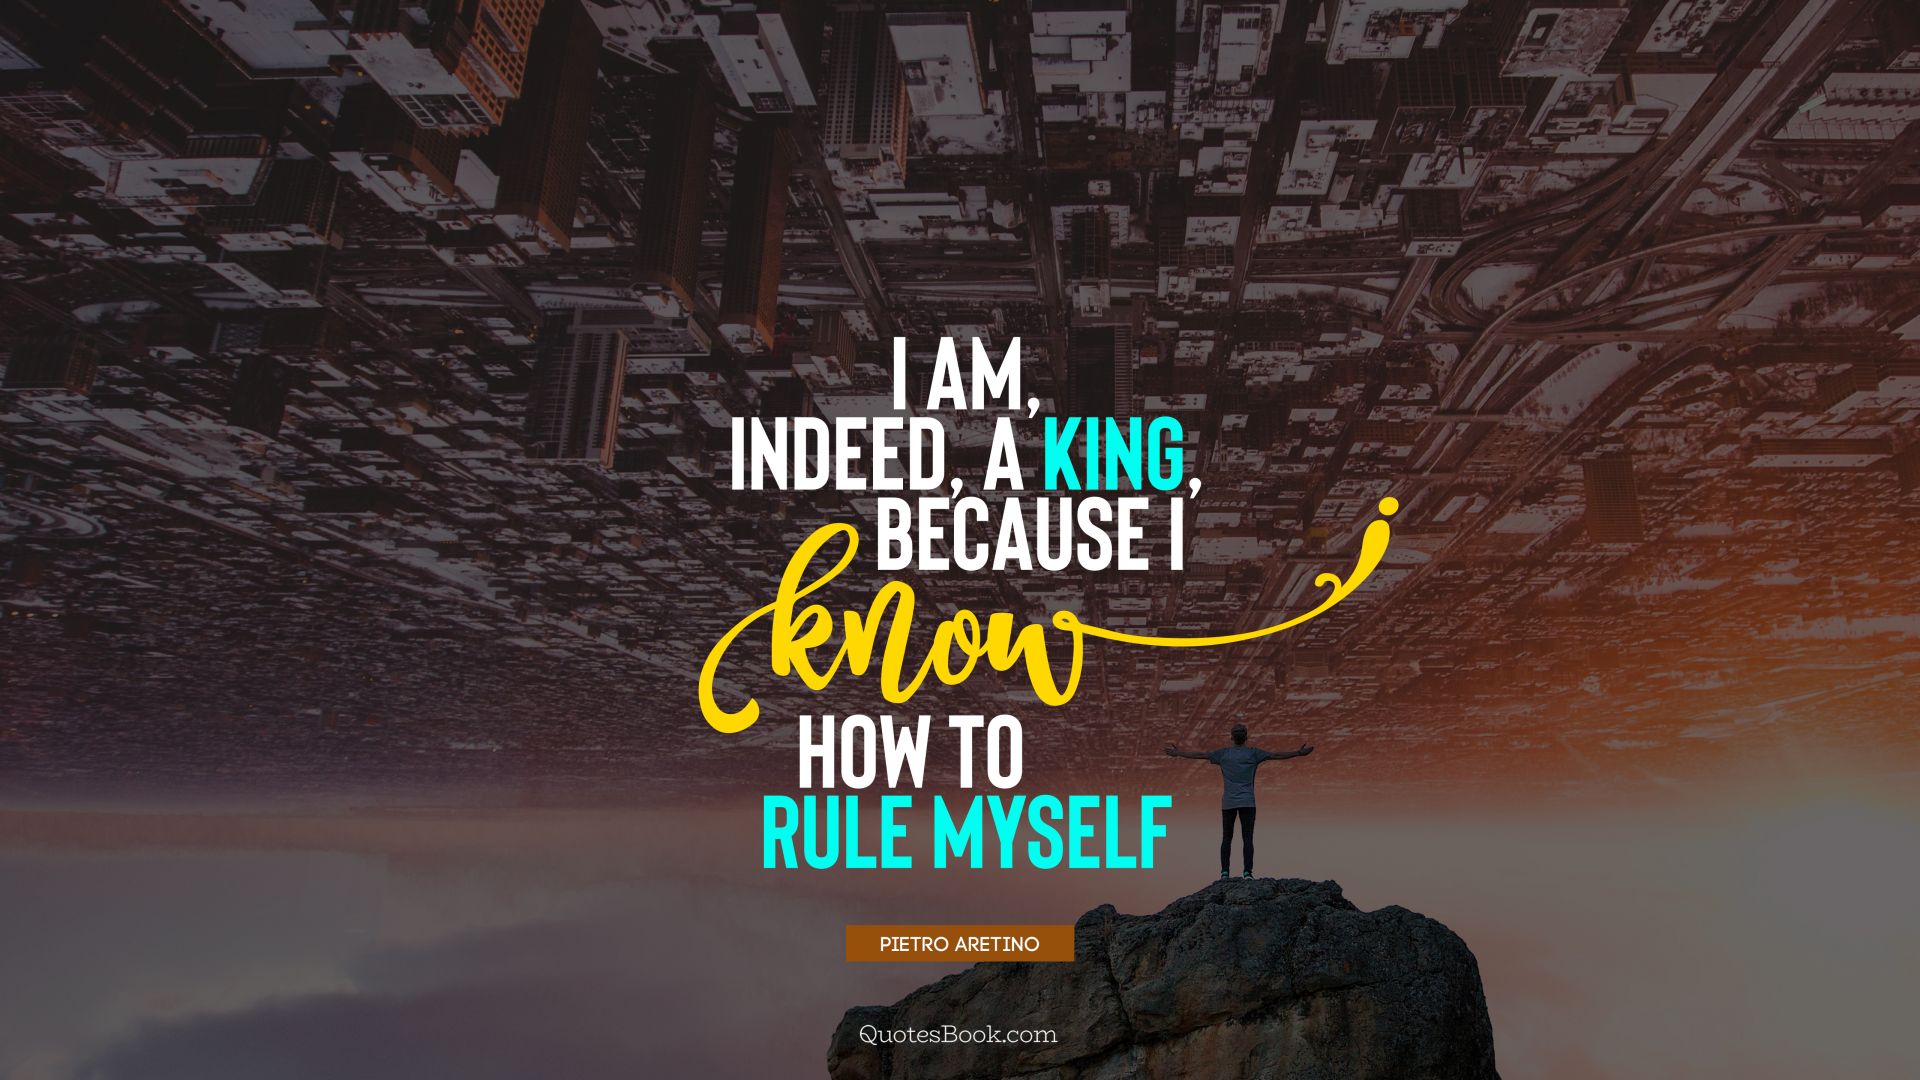 I am, indeed, a king, because I know how to rule myself. - Quote by Pietro Aretino